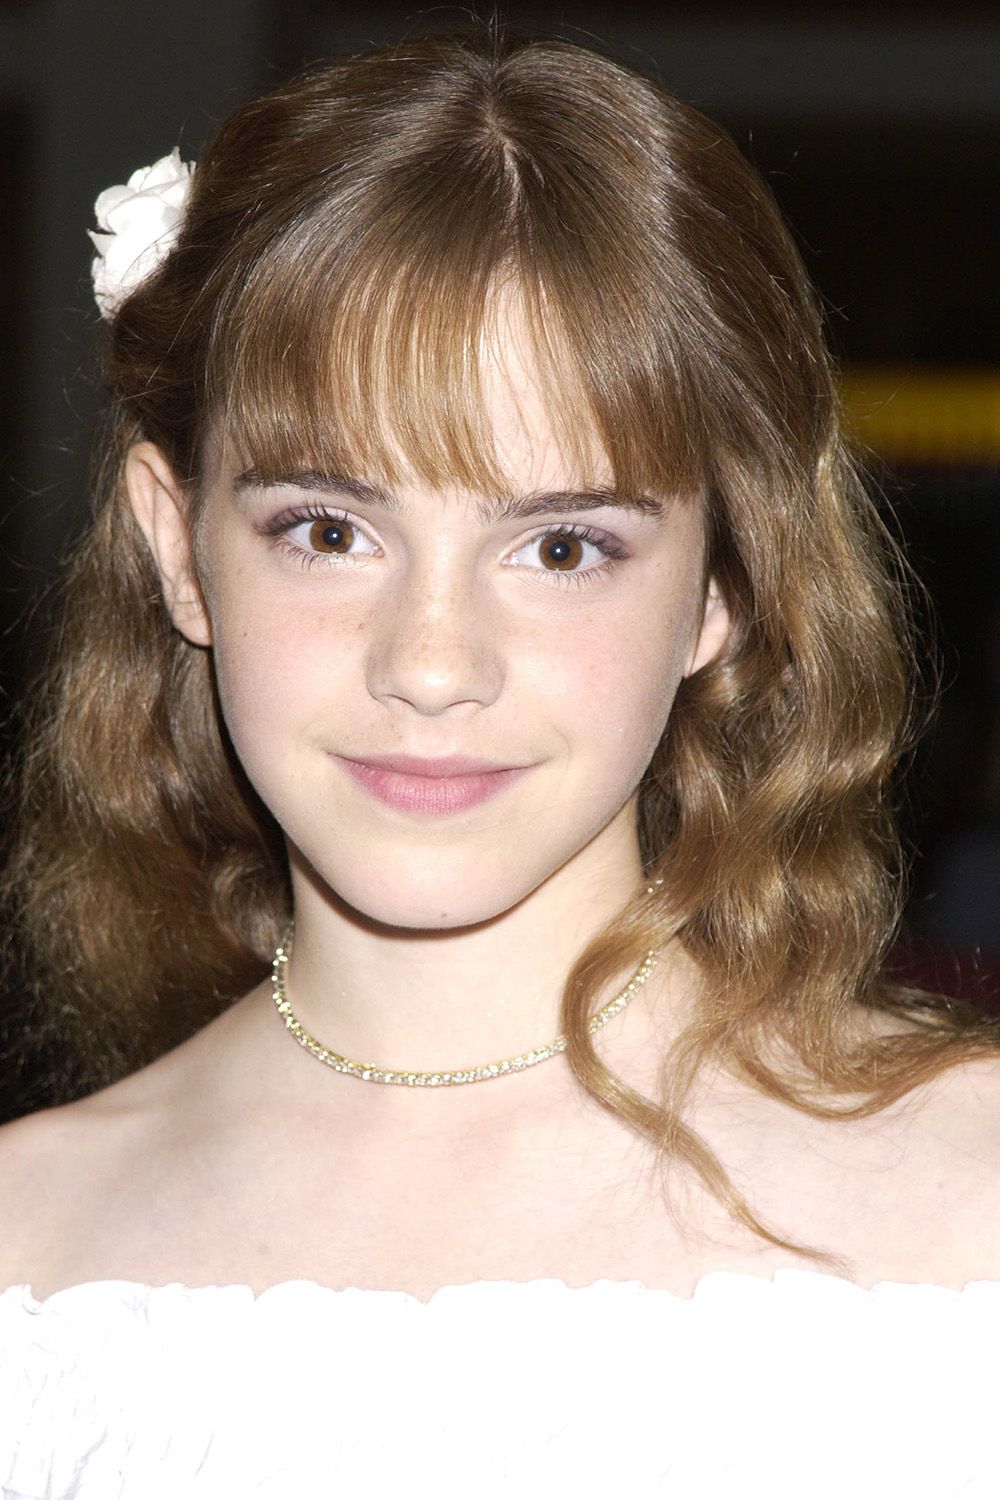 Hus Mount Vesuv Chaiselong Emma Watson's Best Hairstyles - Emma Watson Haircuts and Hair Color